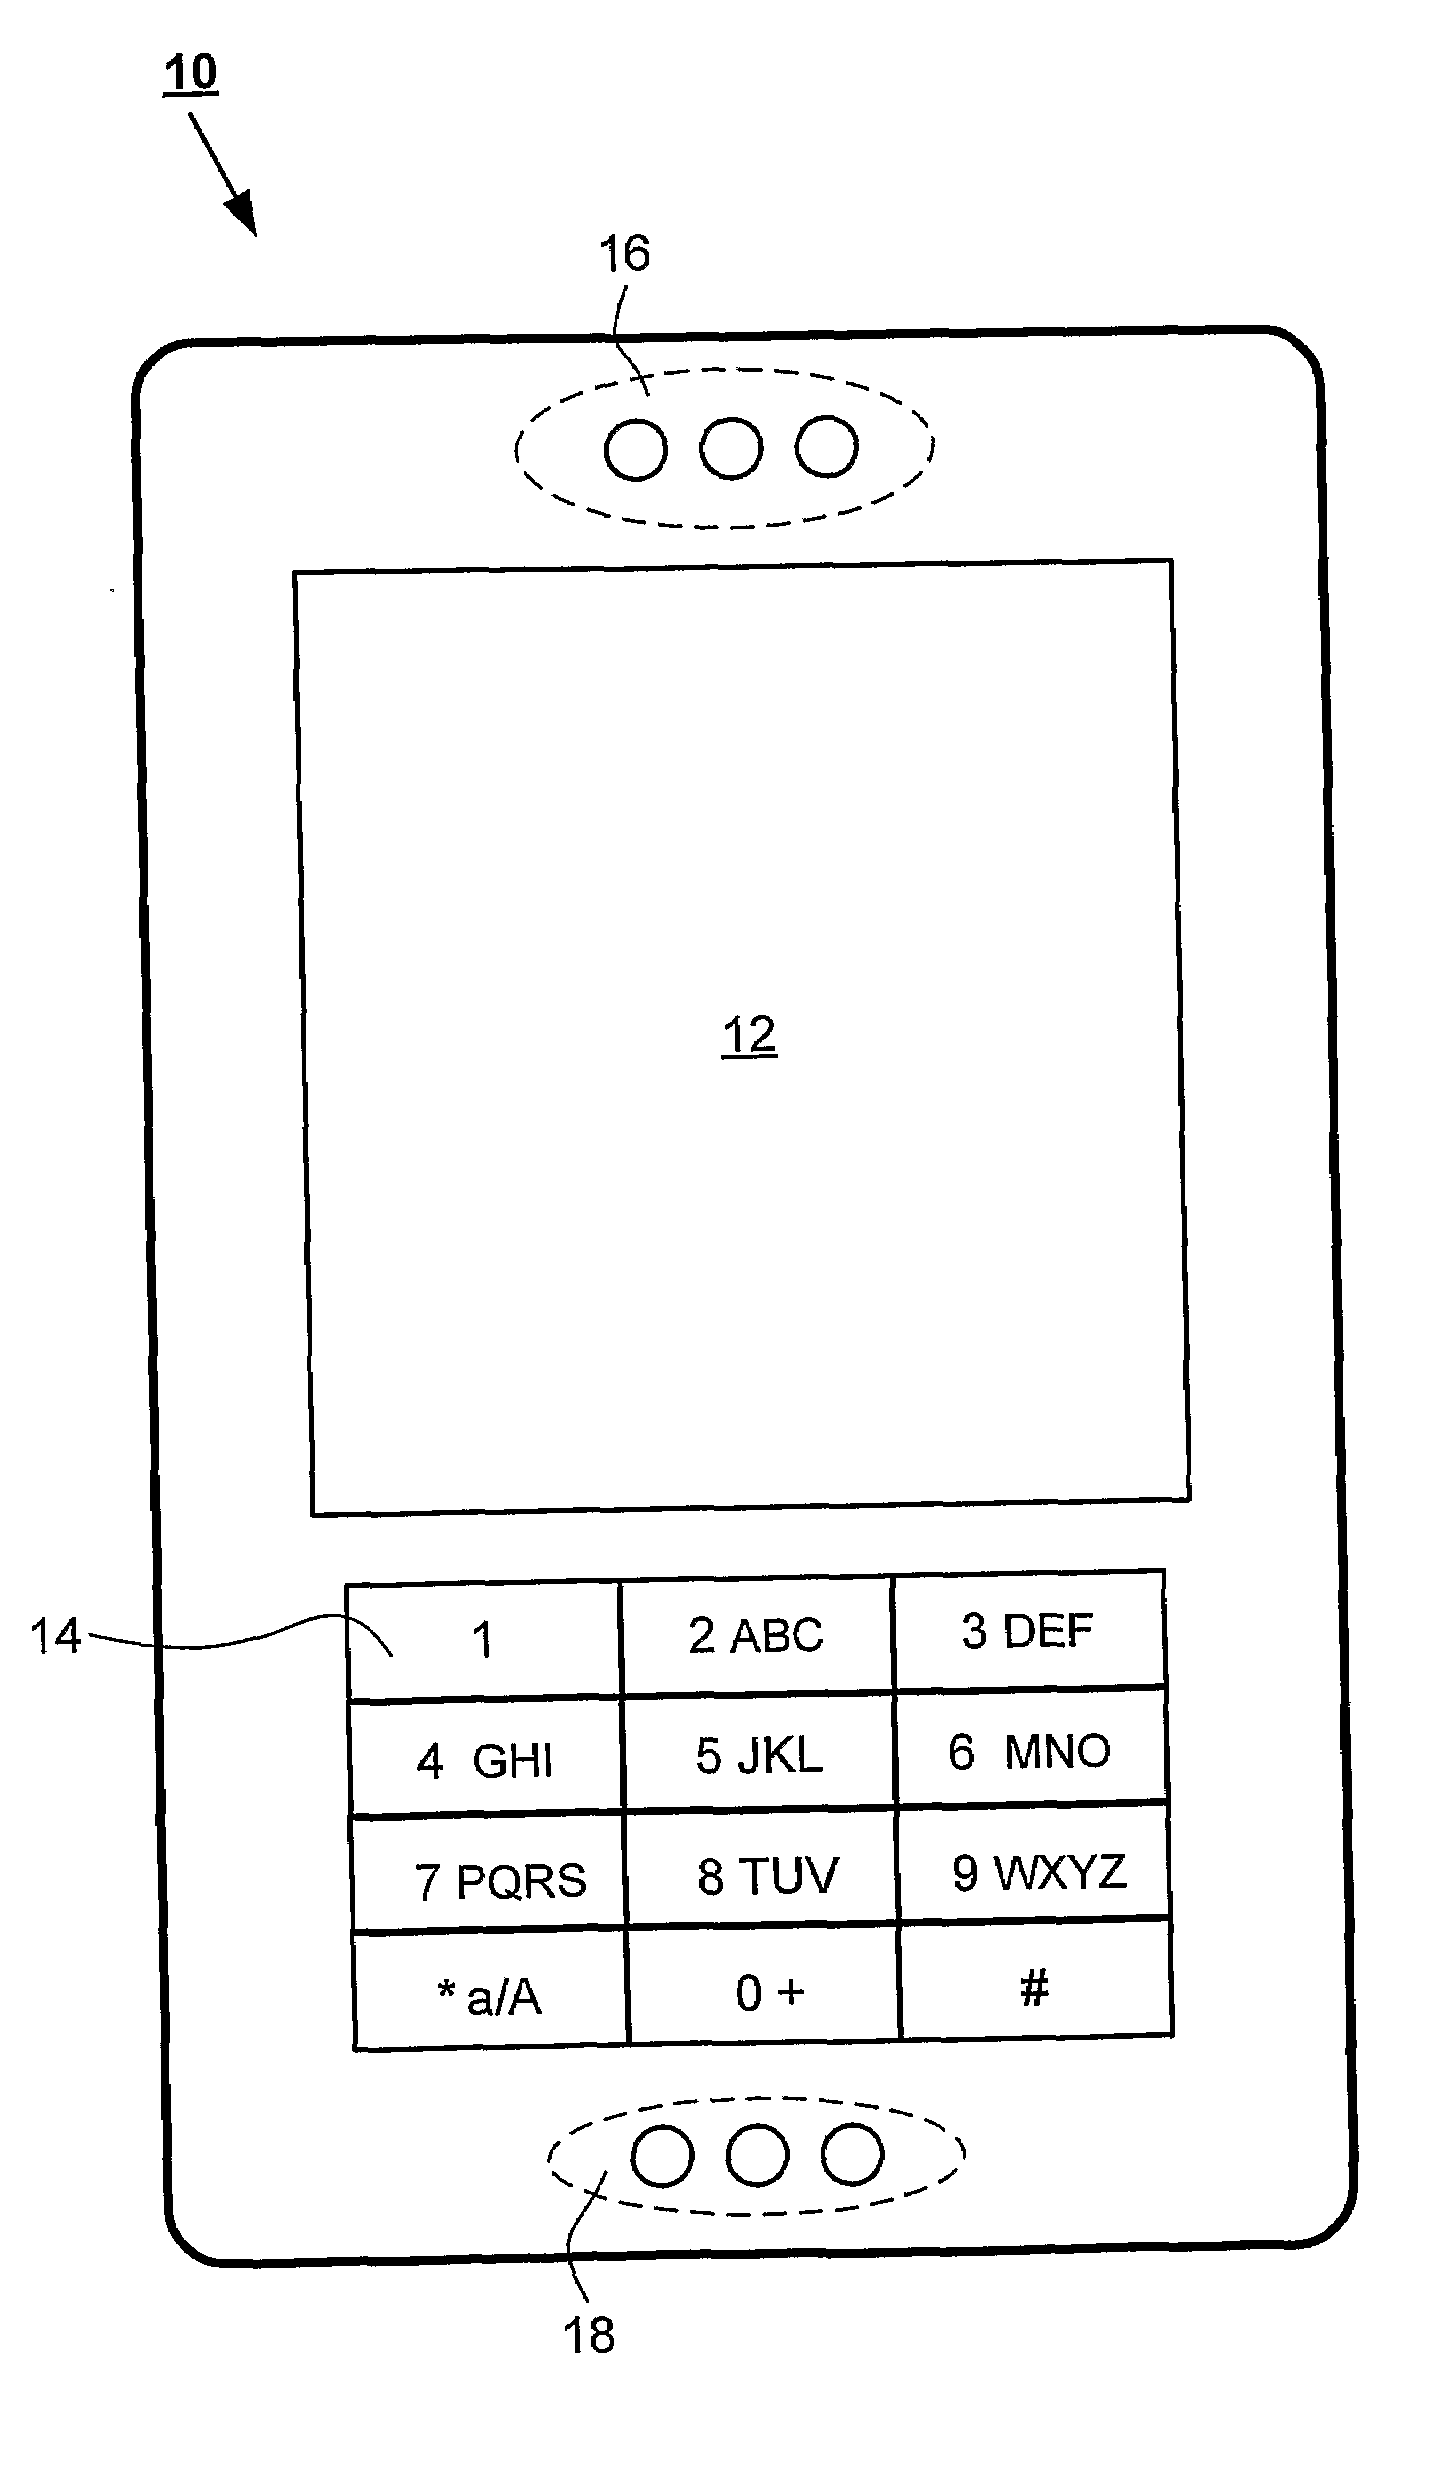 Retreiving and presenting information in a portable device